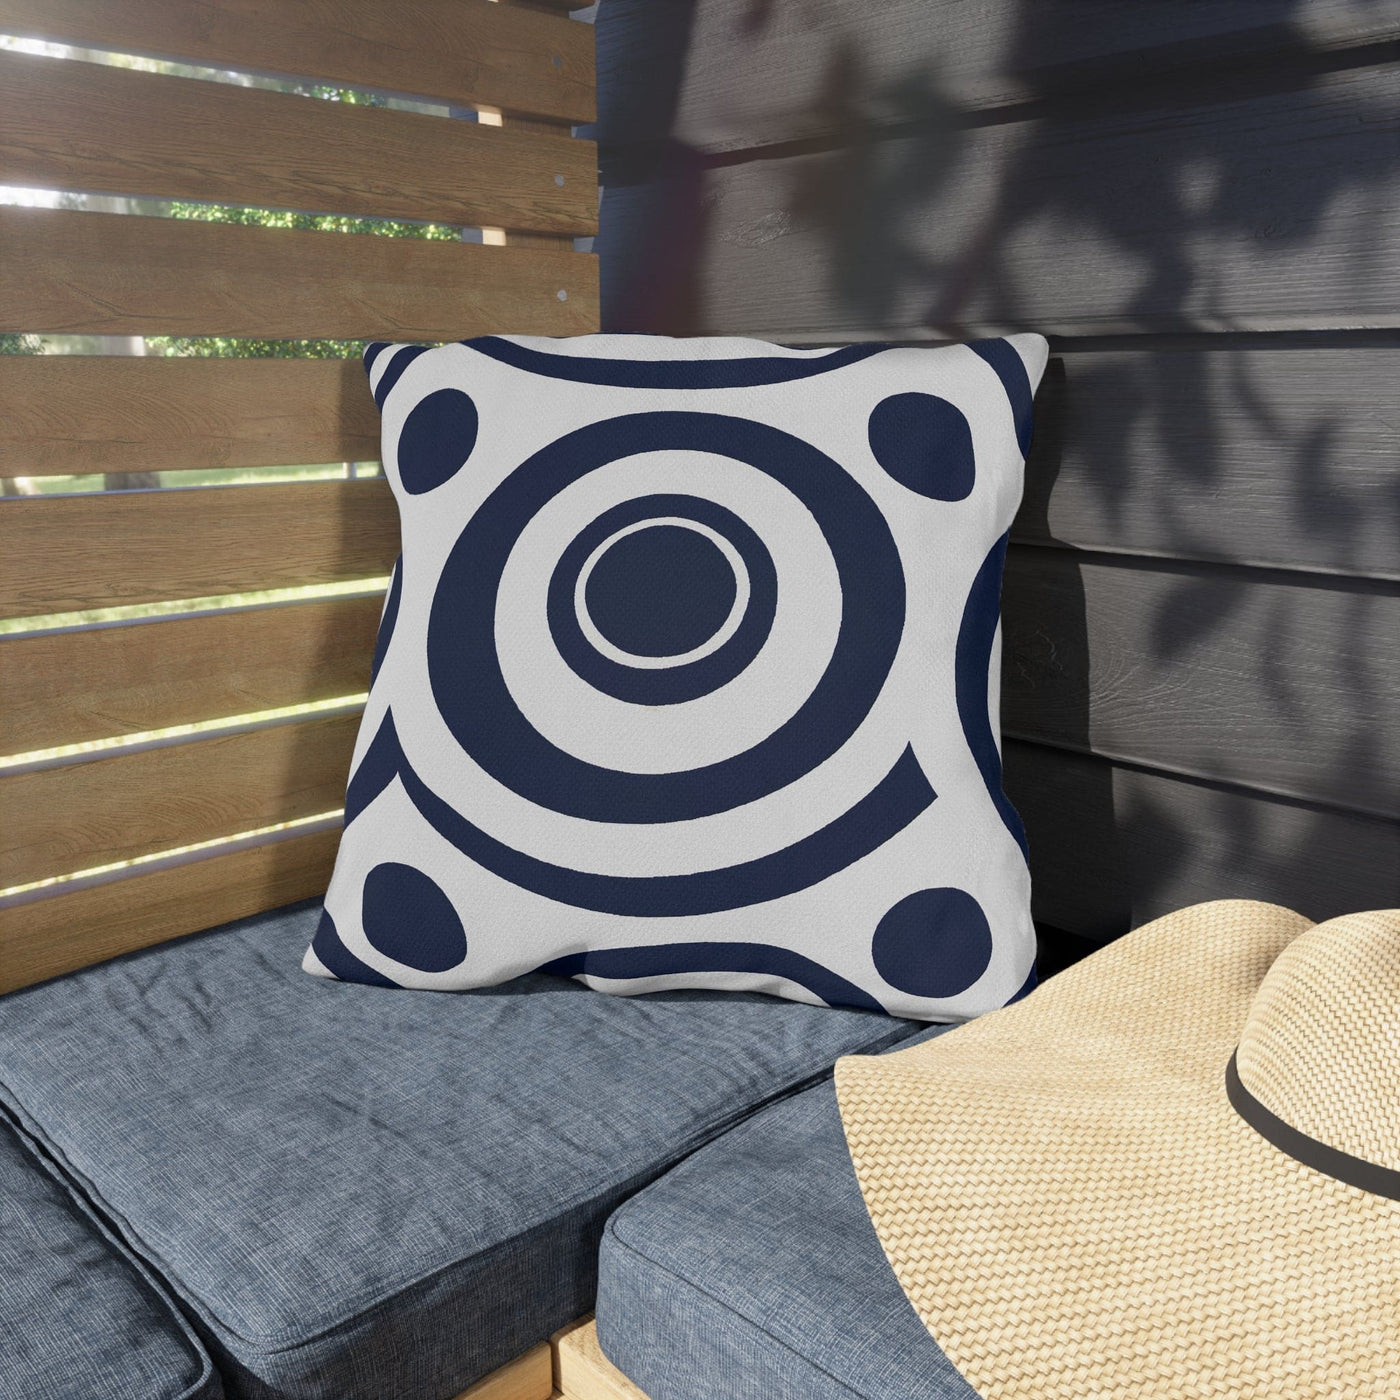 Indoor/outdoor Throw Pillow Navy Blue And White Circular Pattern - Home Decor